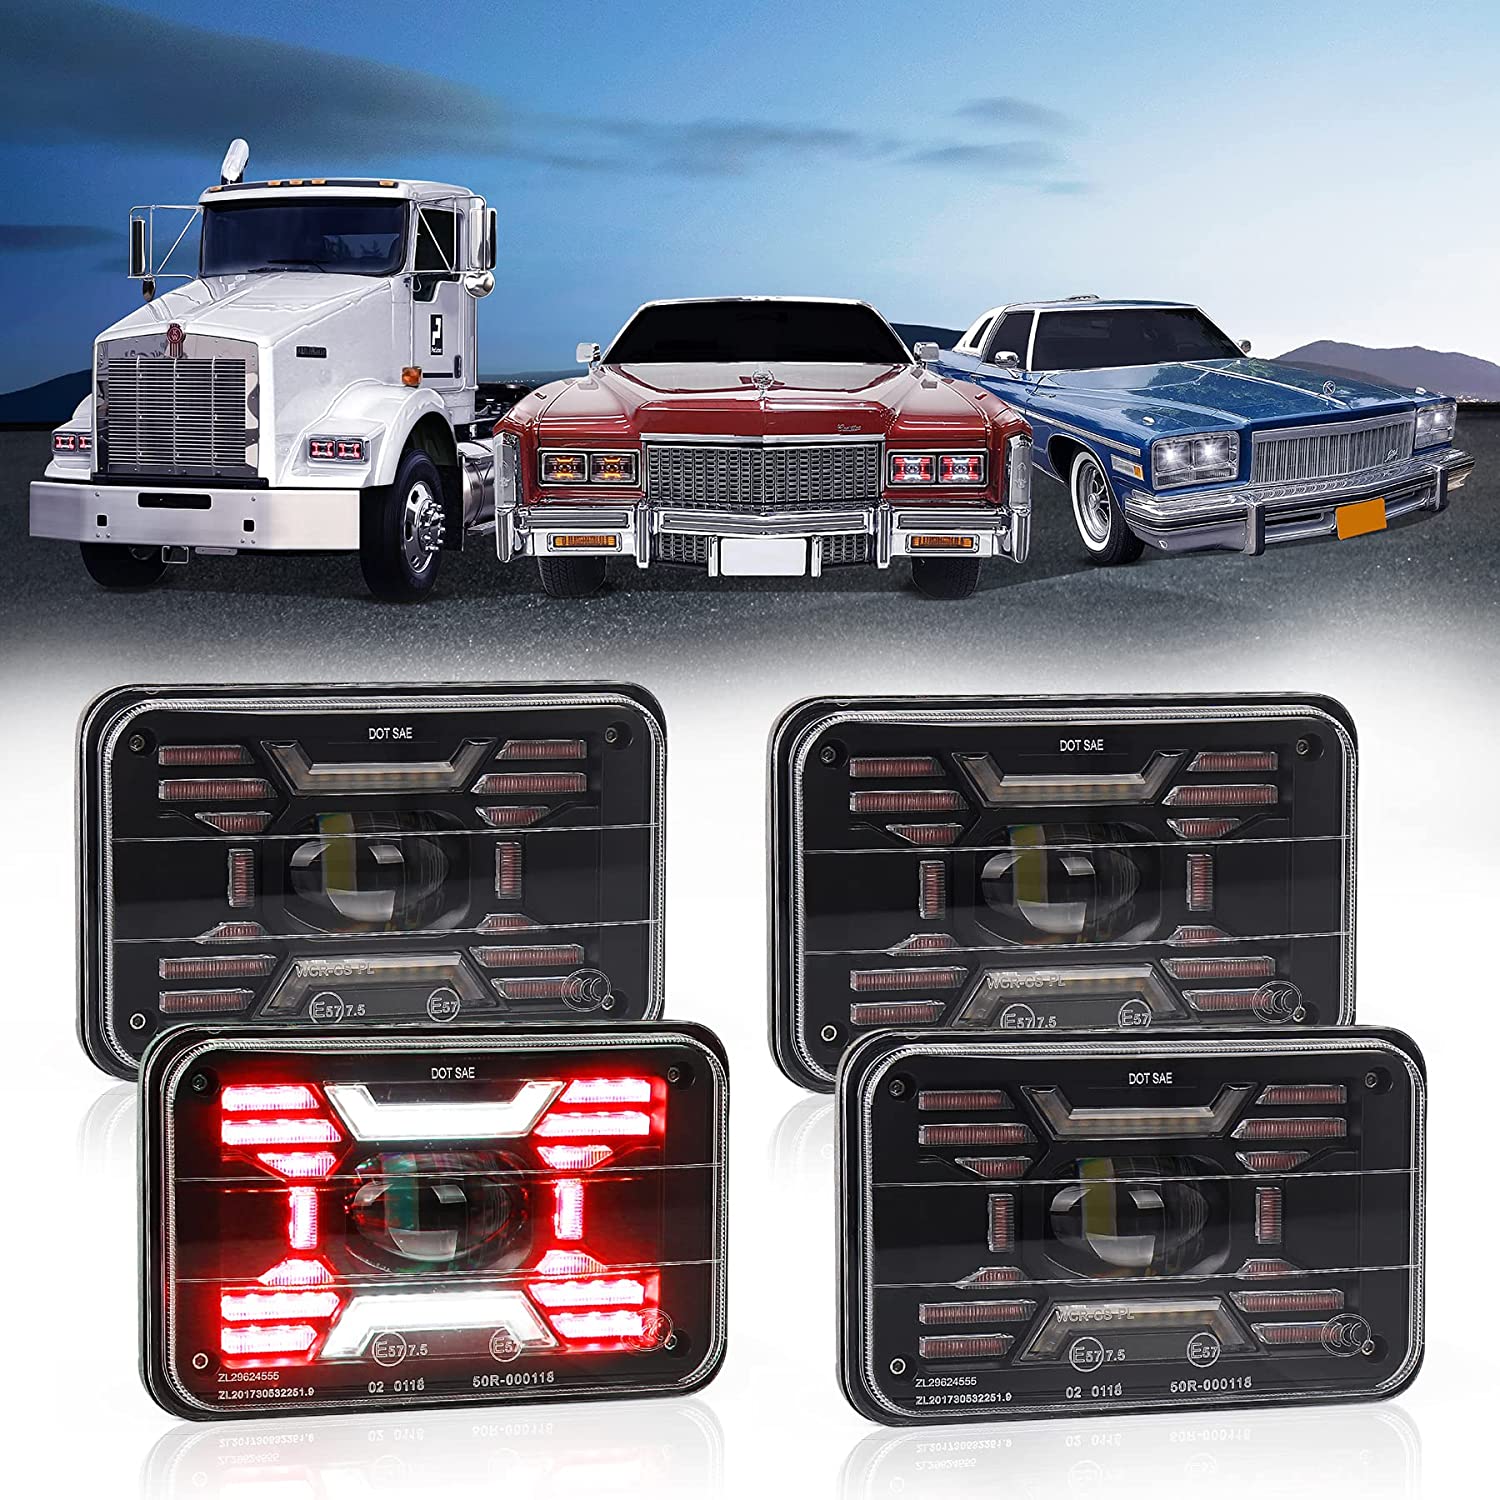 4x6 LED Headlights, 4x6 Unique X Design Sealed Hi/Lo Beam Rectangular LED Headlights with DOT White&Red DRL Compatible With Truck Peterbilt 379 Kenworth Feightliner Ford Monte Carlo Oldsmobile